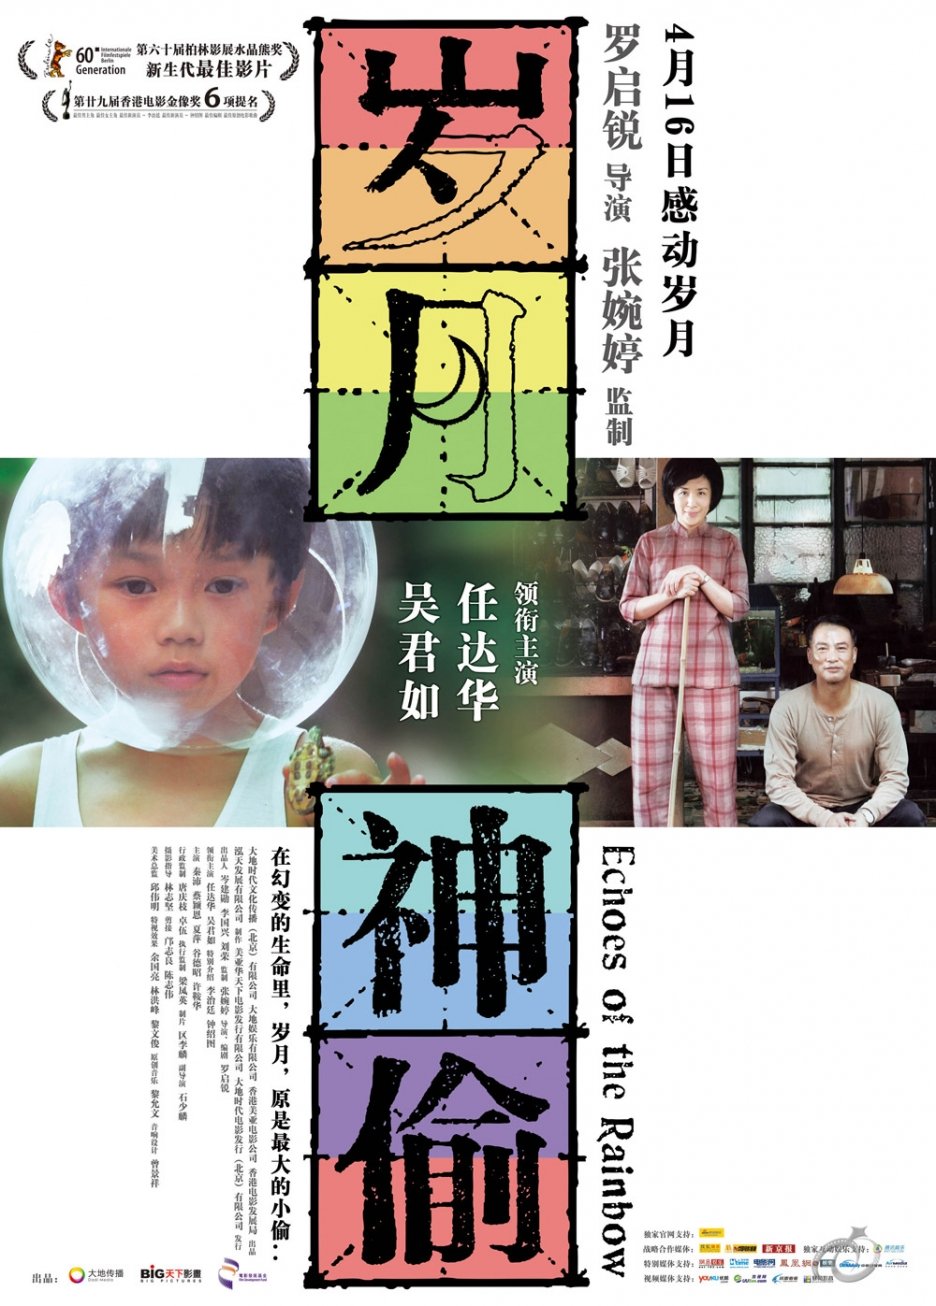 Cantonese poster of the movie Echoes of the Rainbow